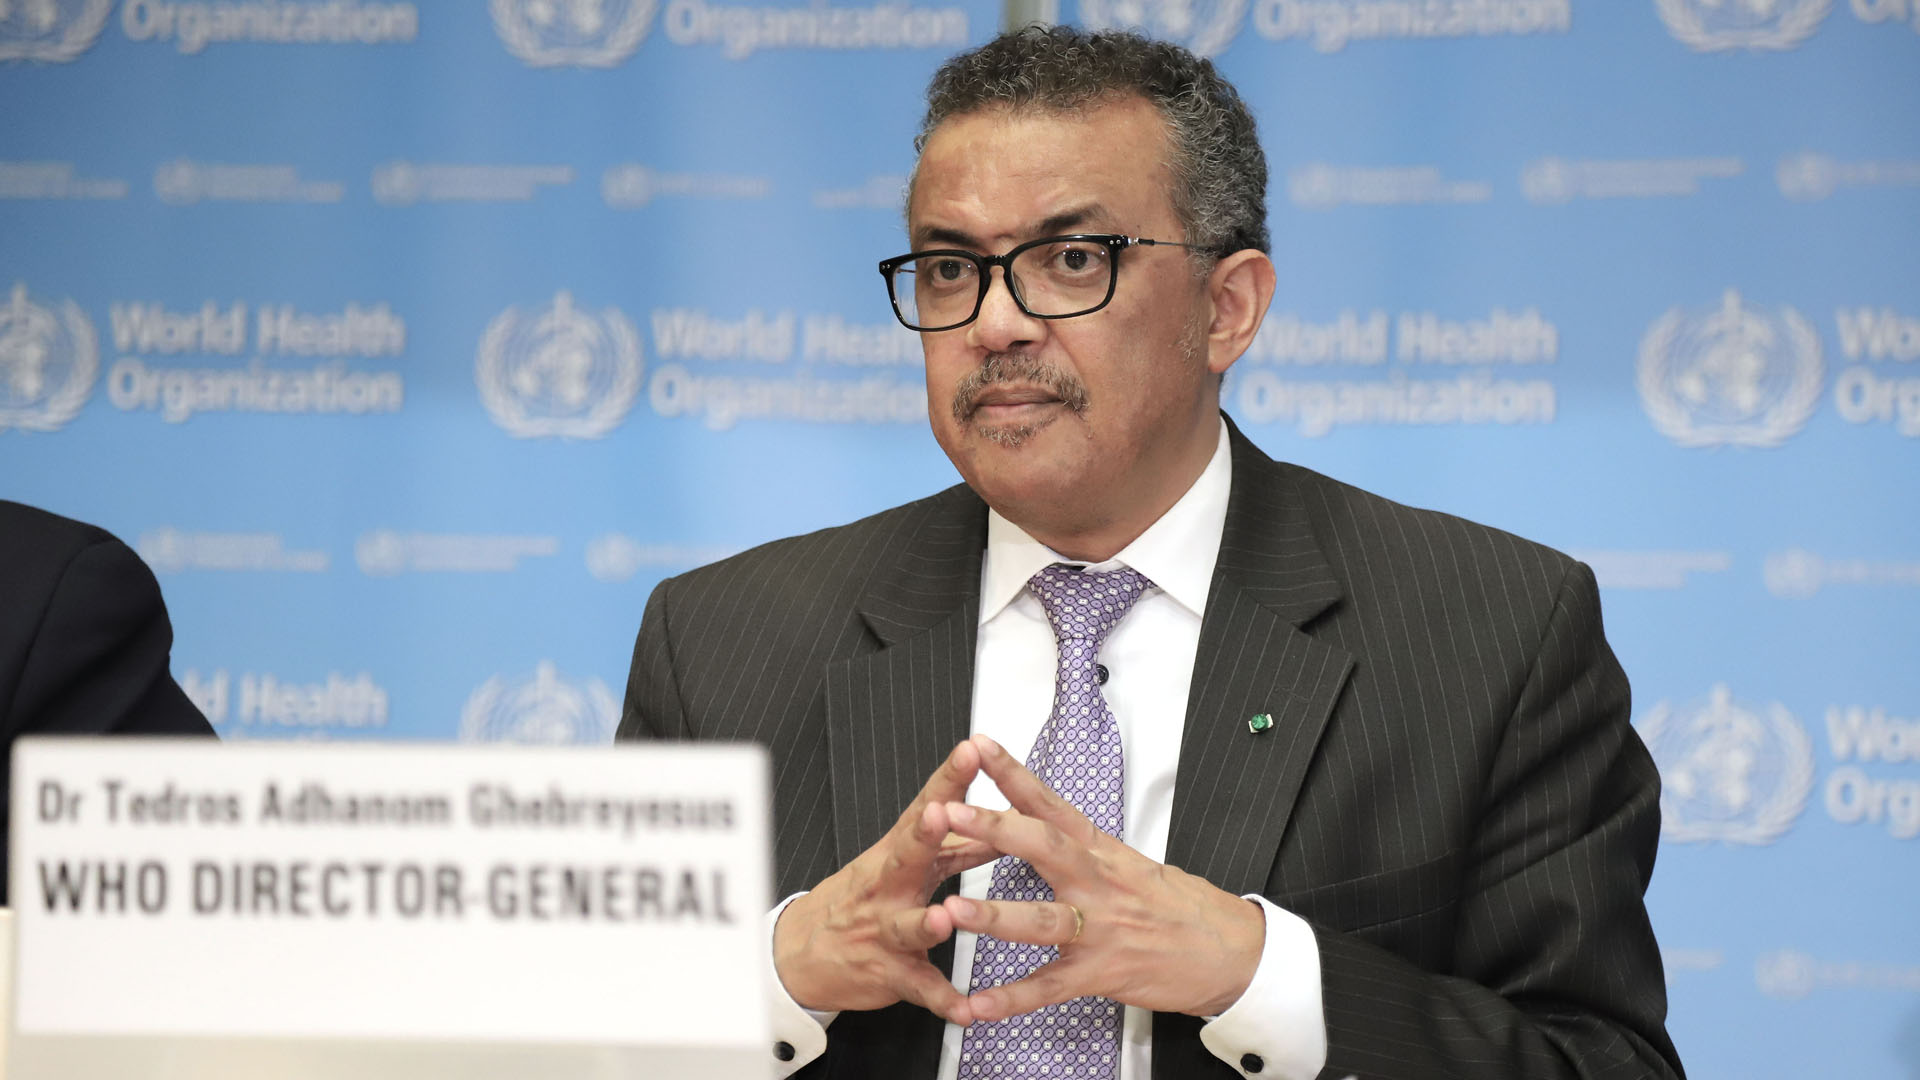 WHO to set up Independent Panel To Review Pandemic Handling